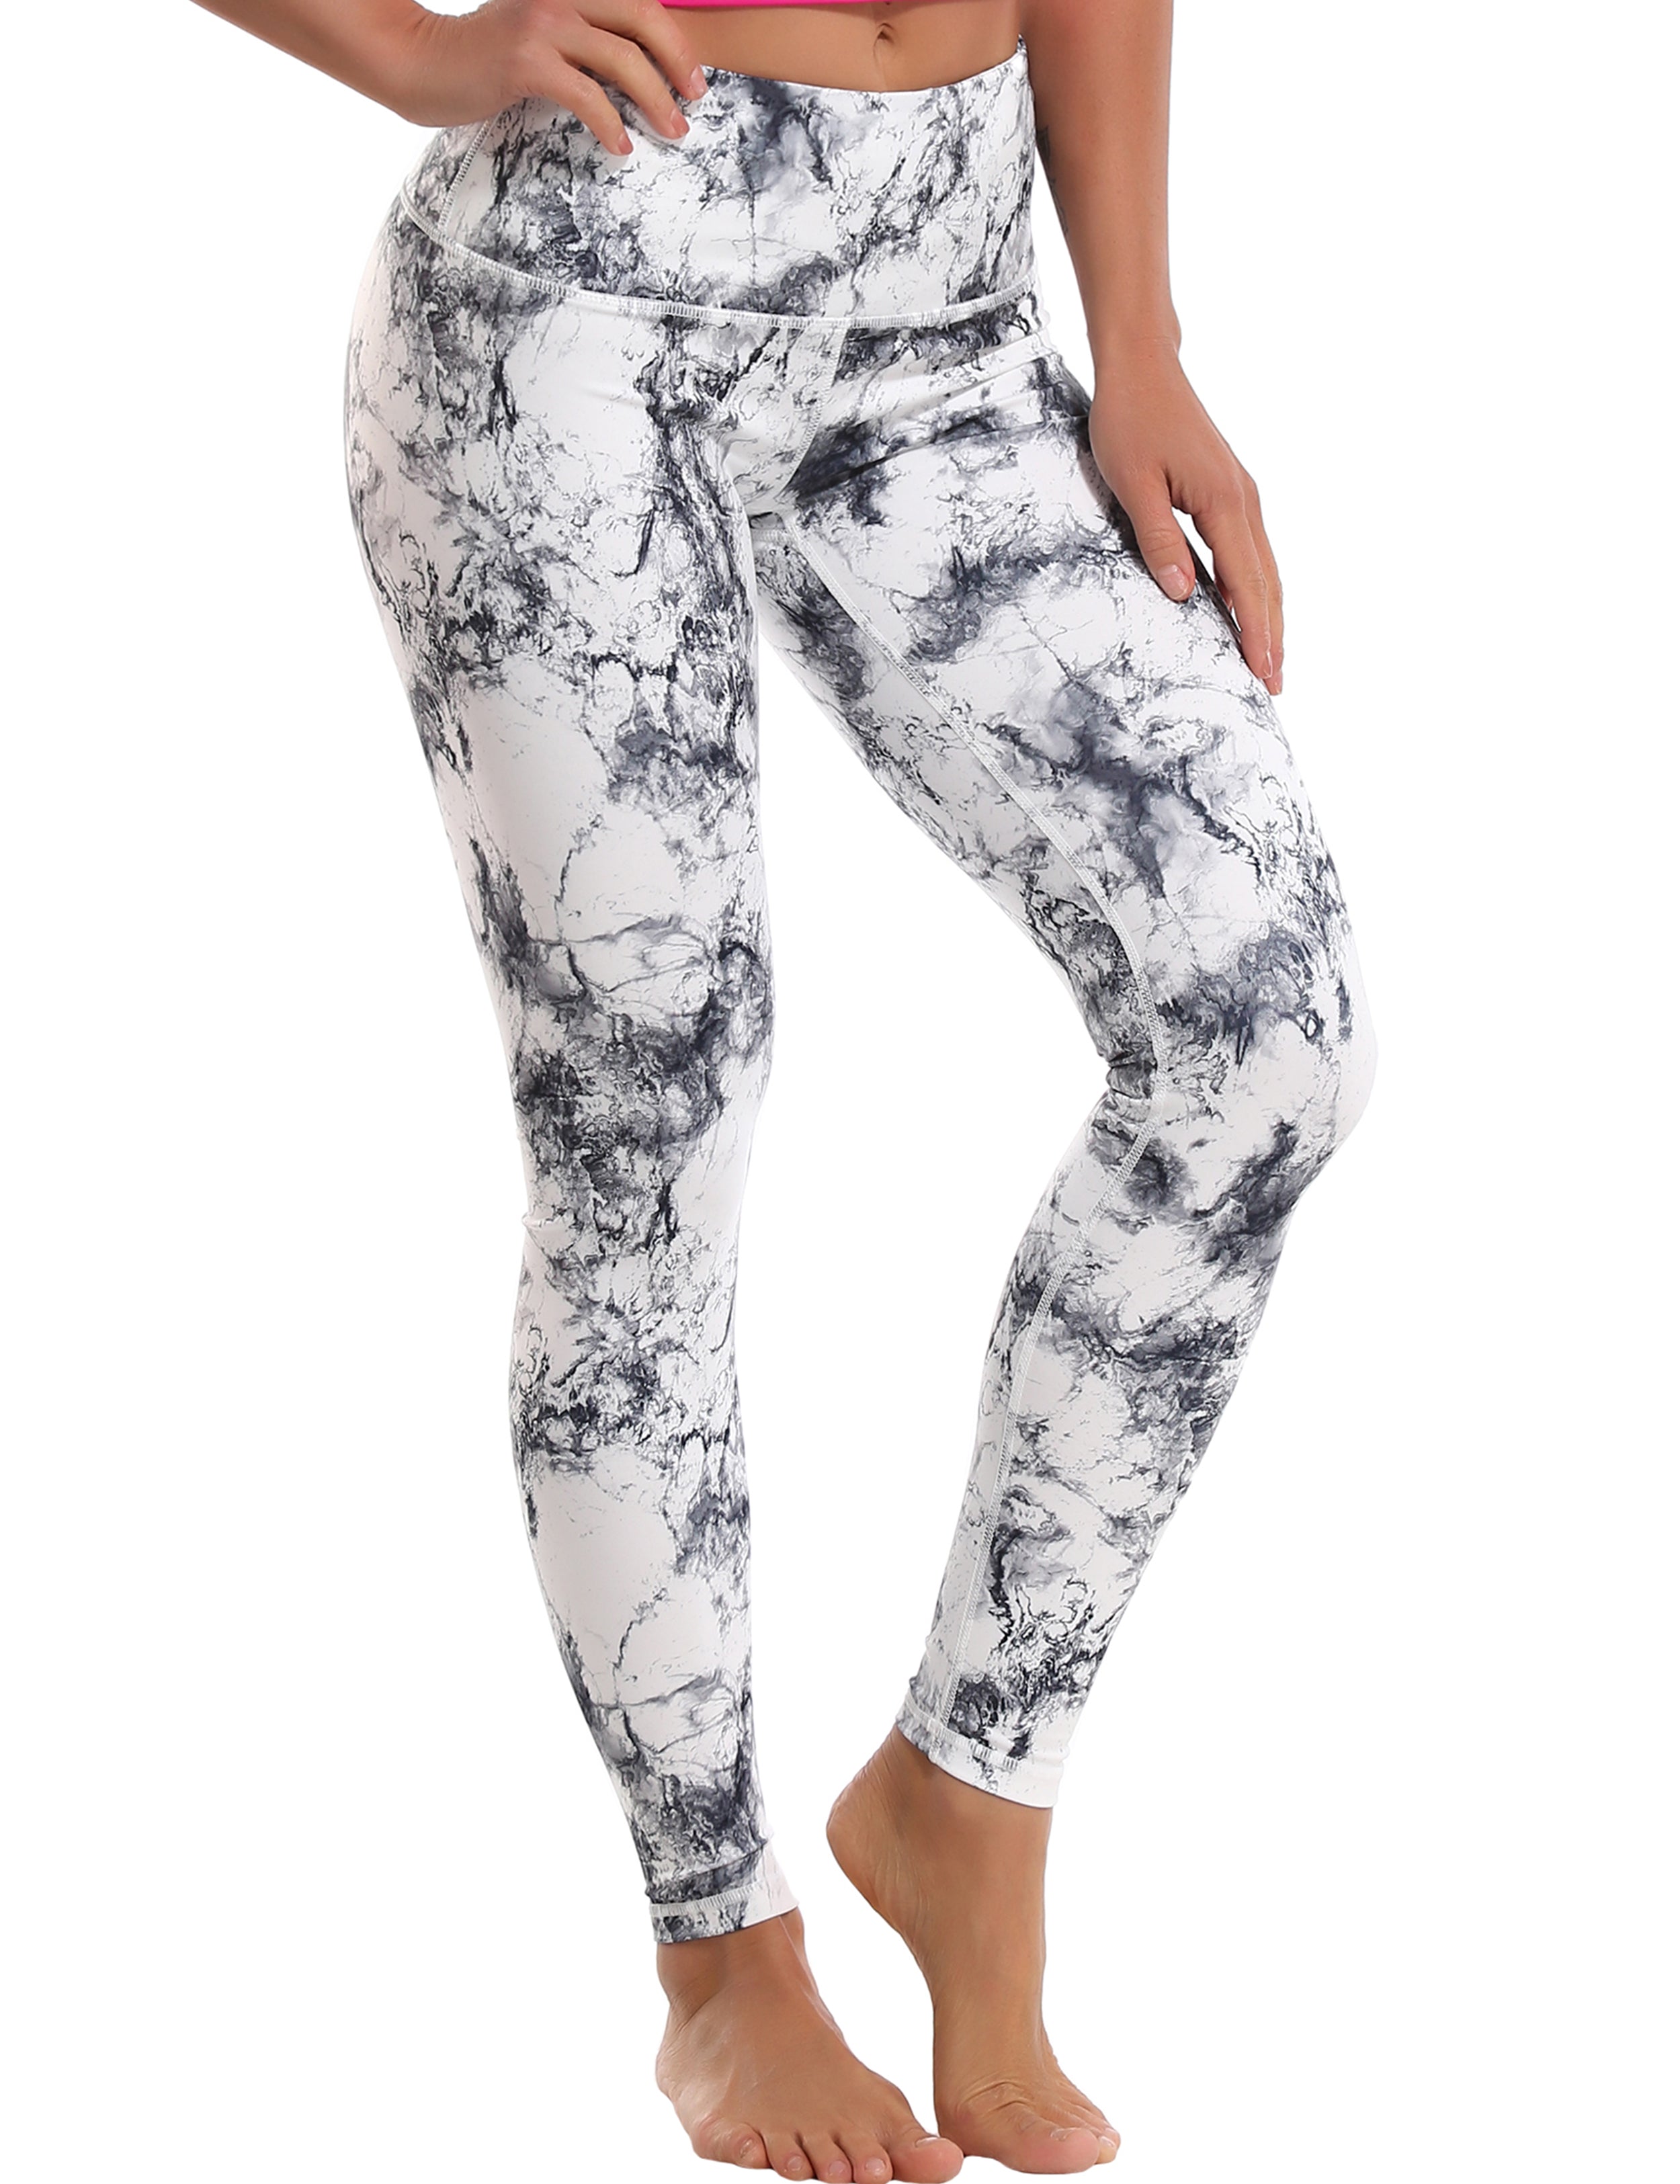 High Waist yogastudio Pants arabescato 82%Polyester/18%Spandex Fabric doesn't attract lint easily 4-way stretch No see-through Moisture-wicking Tummy control Inner pocket